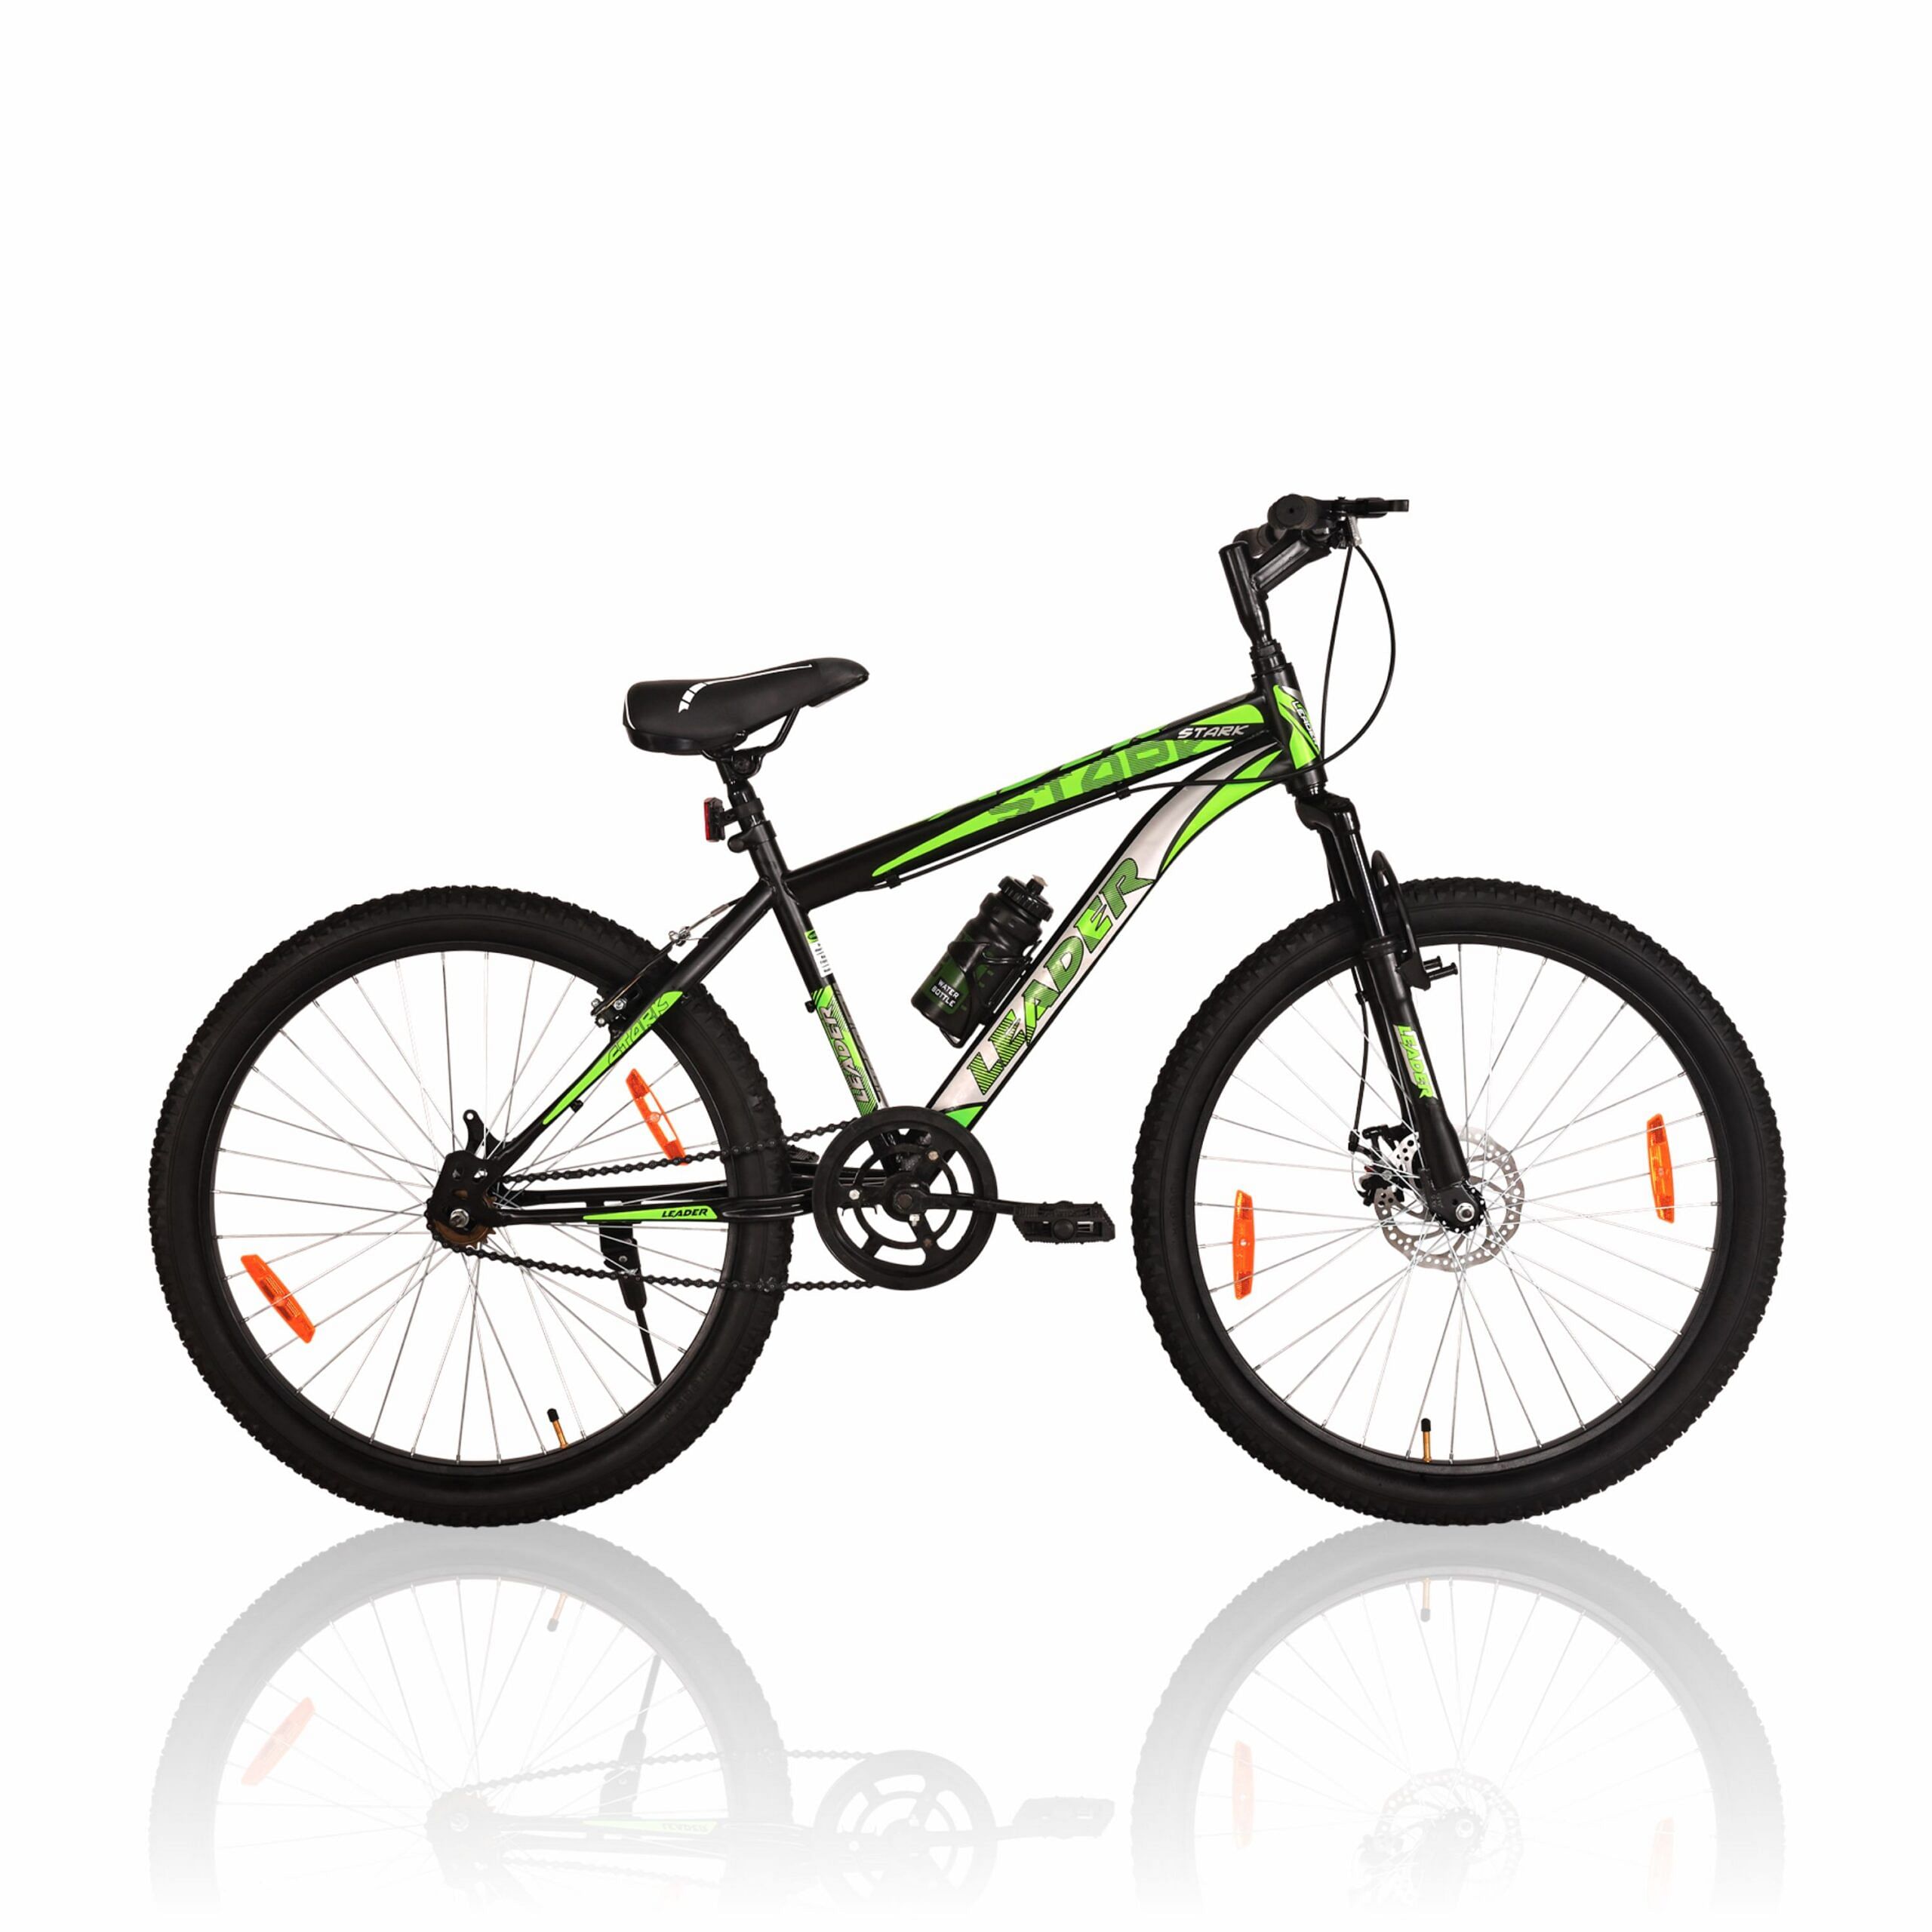 Leader Stark 27.5T with Front Suspension & Disc Brake cycle